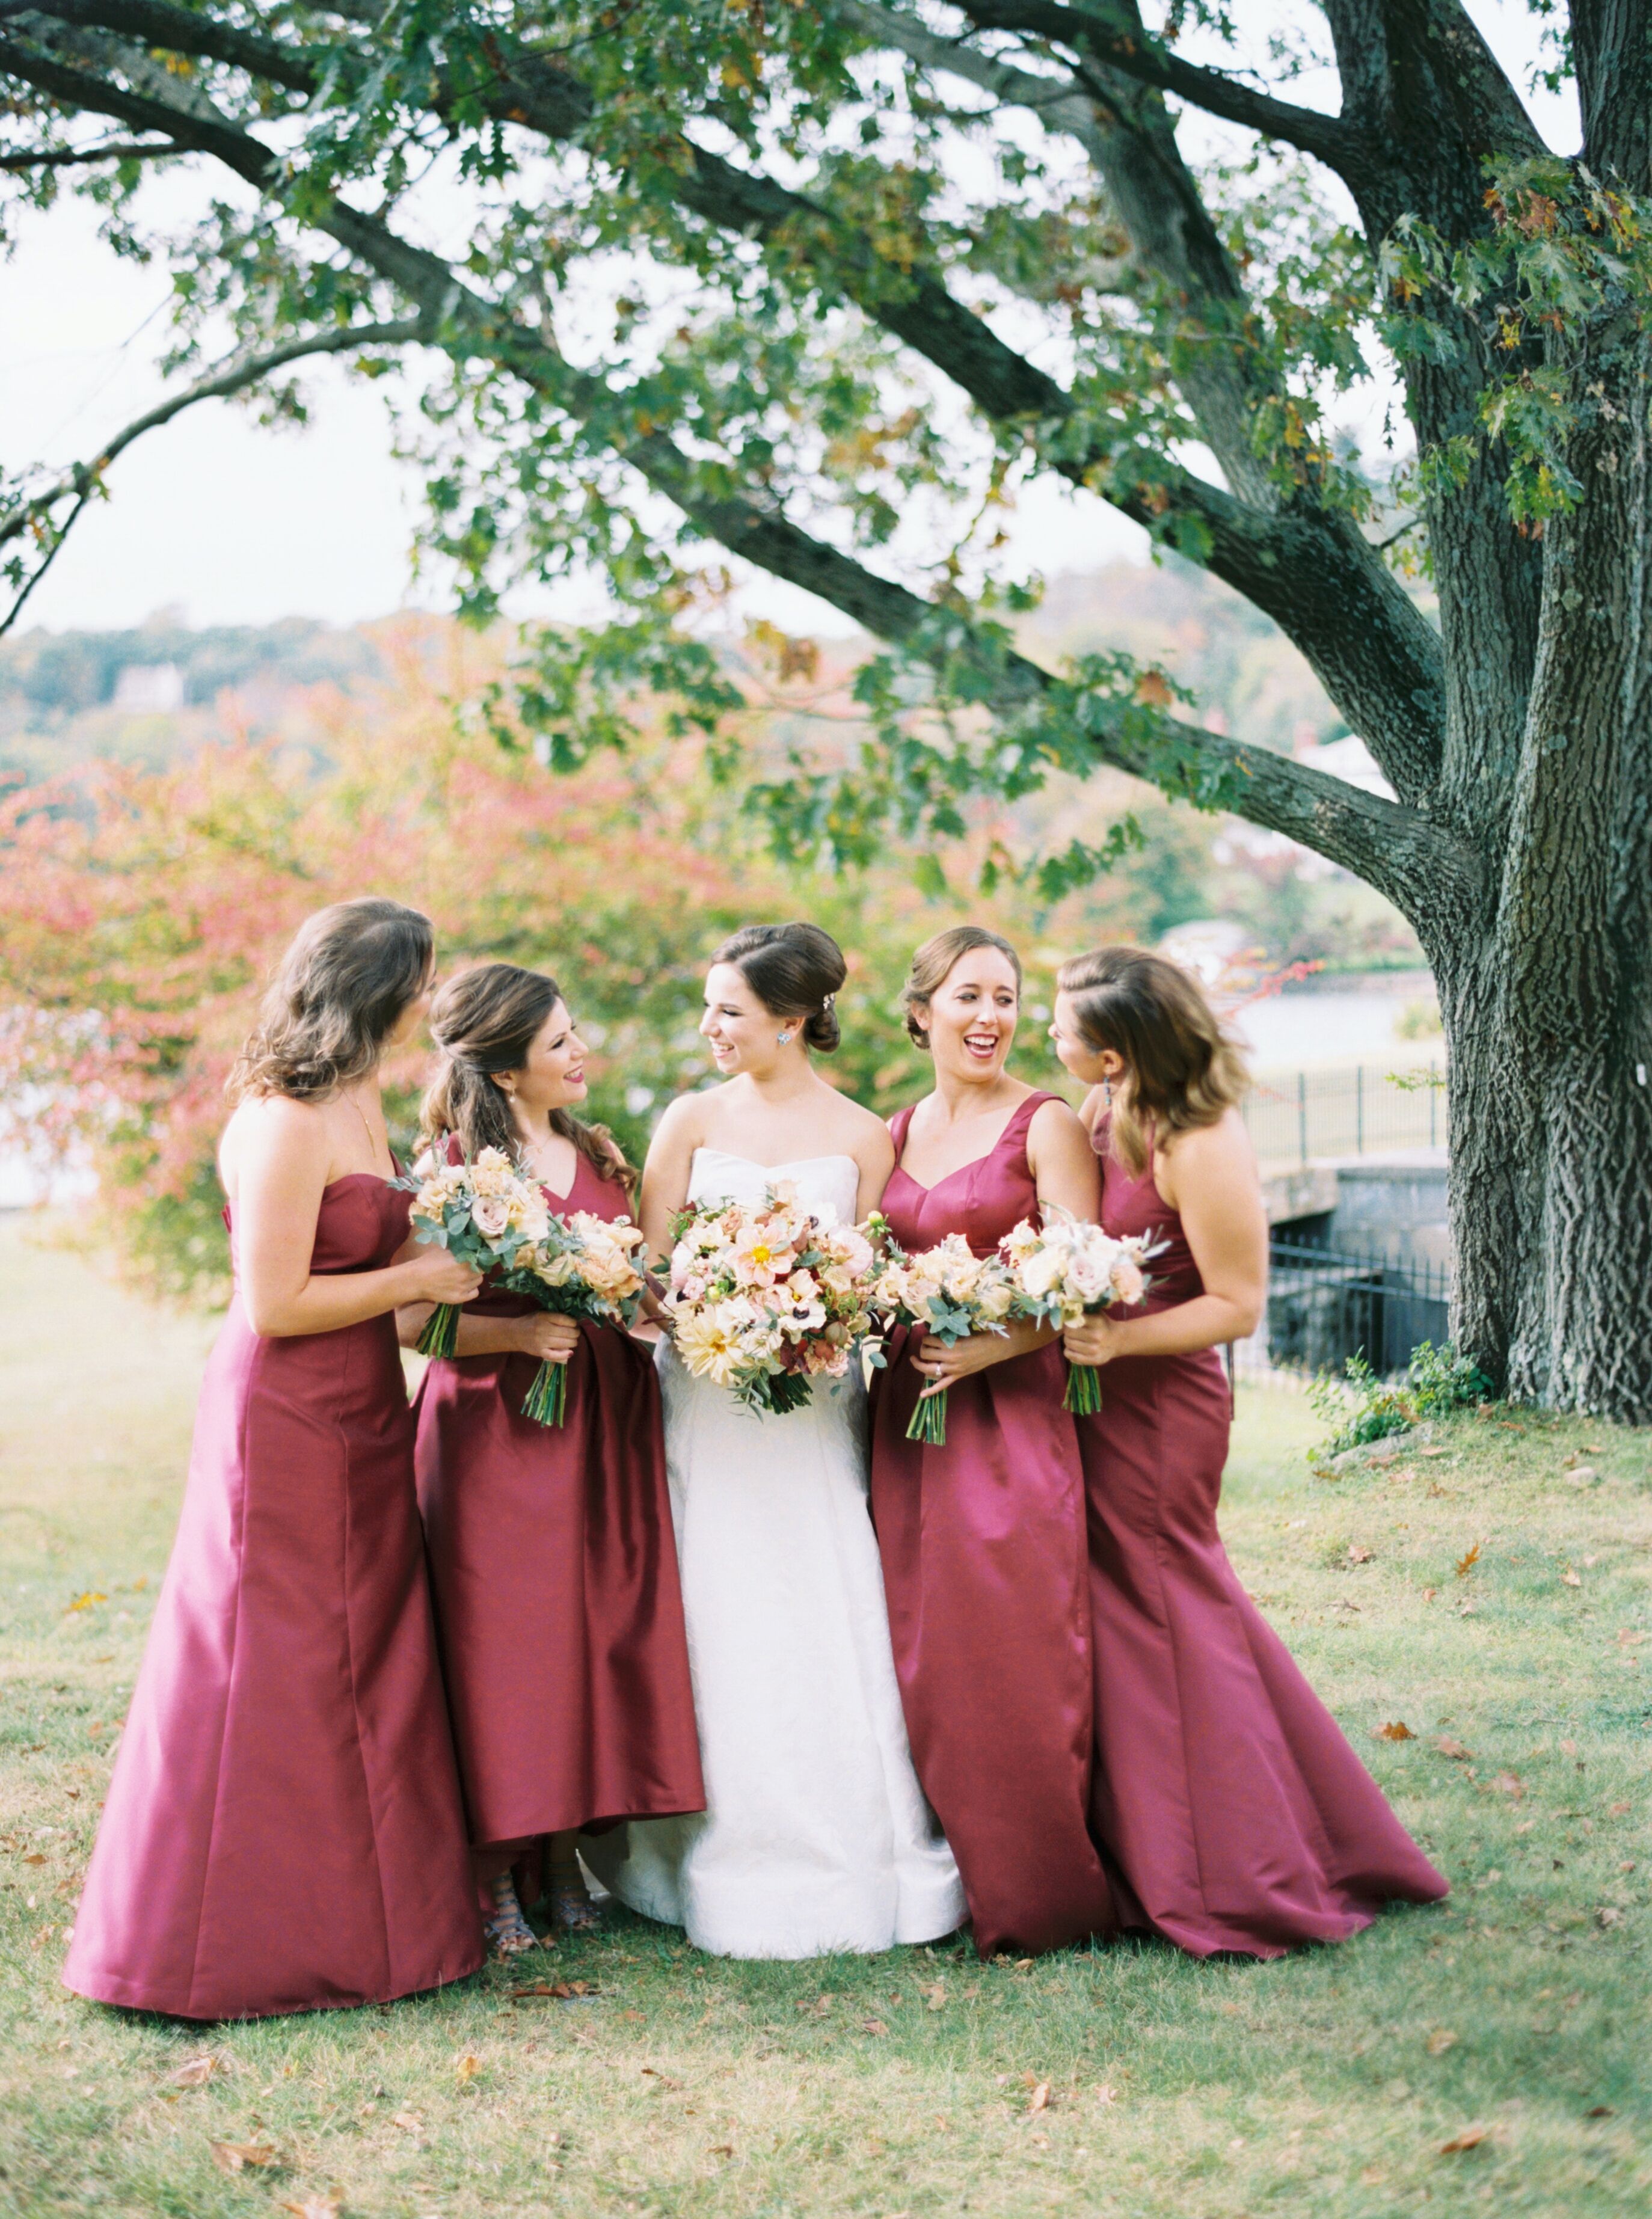 Classic Bridesmaids in Burgundy Dresses for Fall